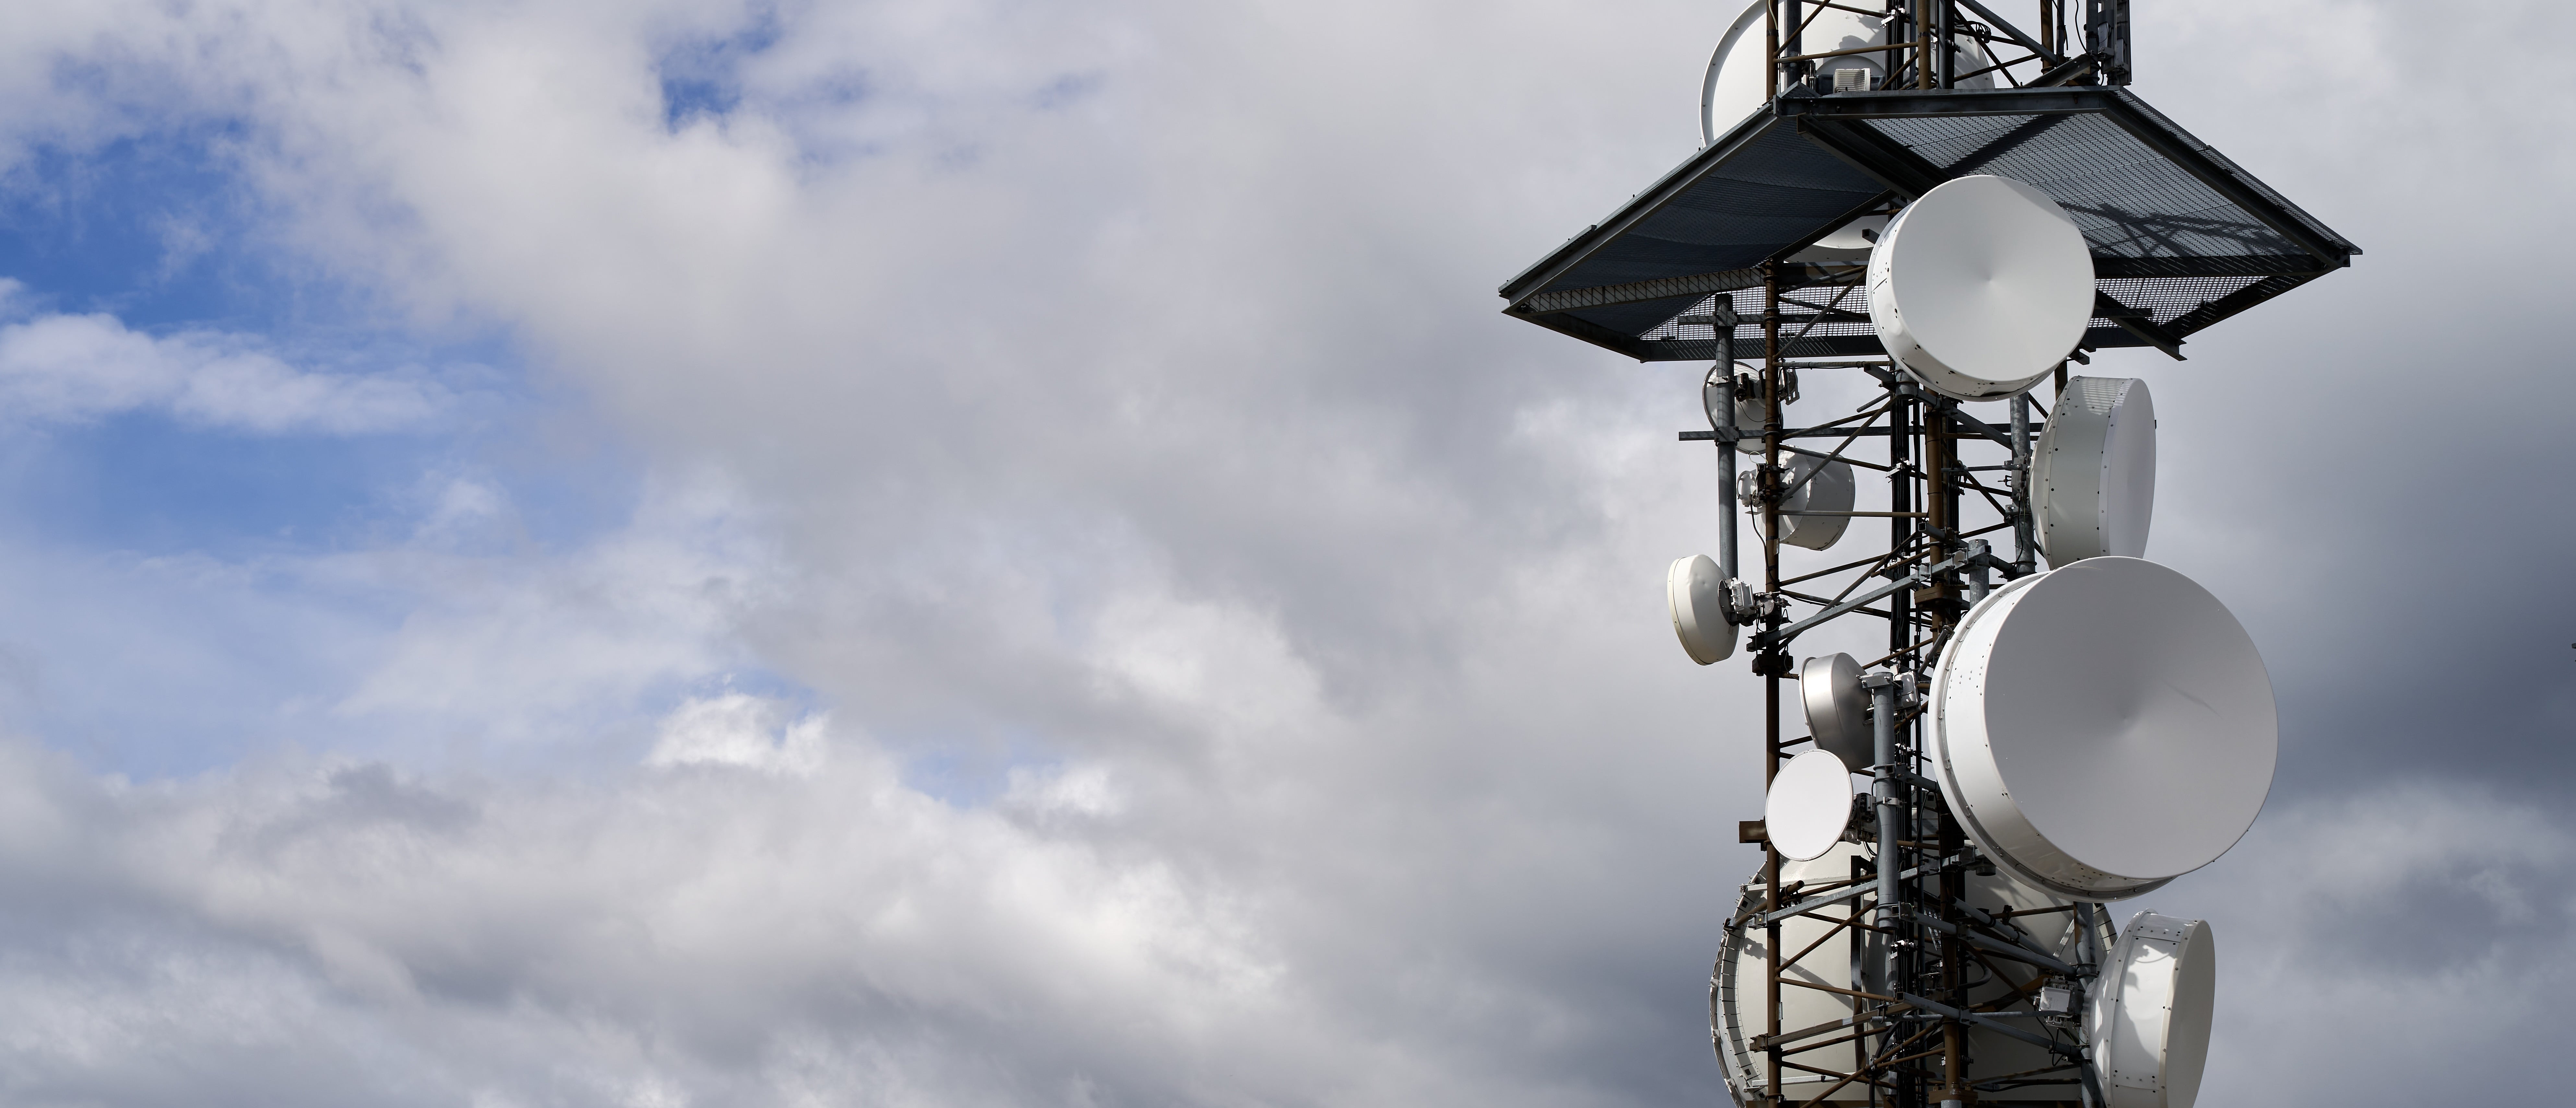 telecommunications-towers-against-cloudy-sky-min